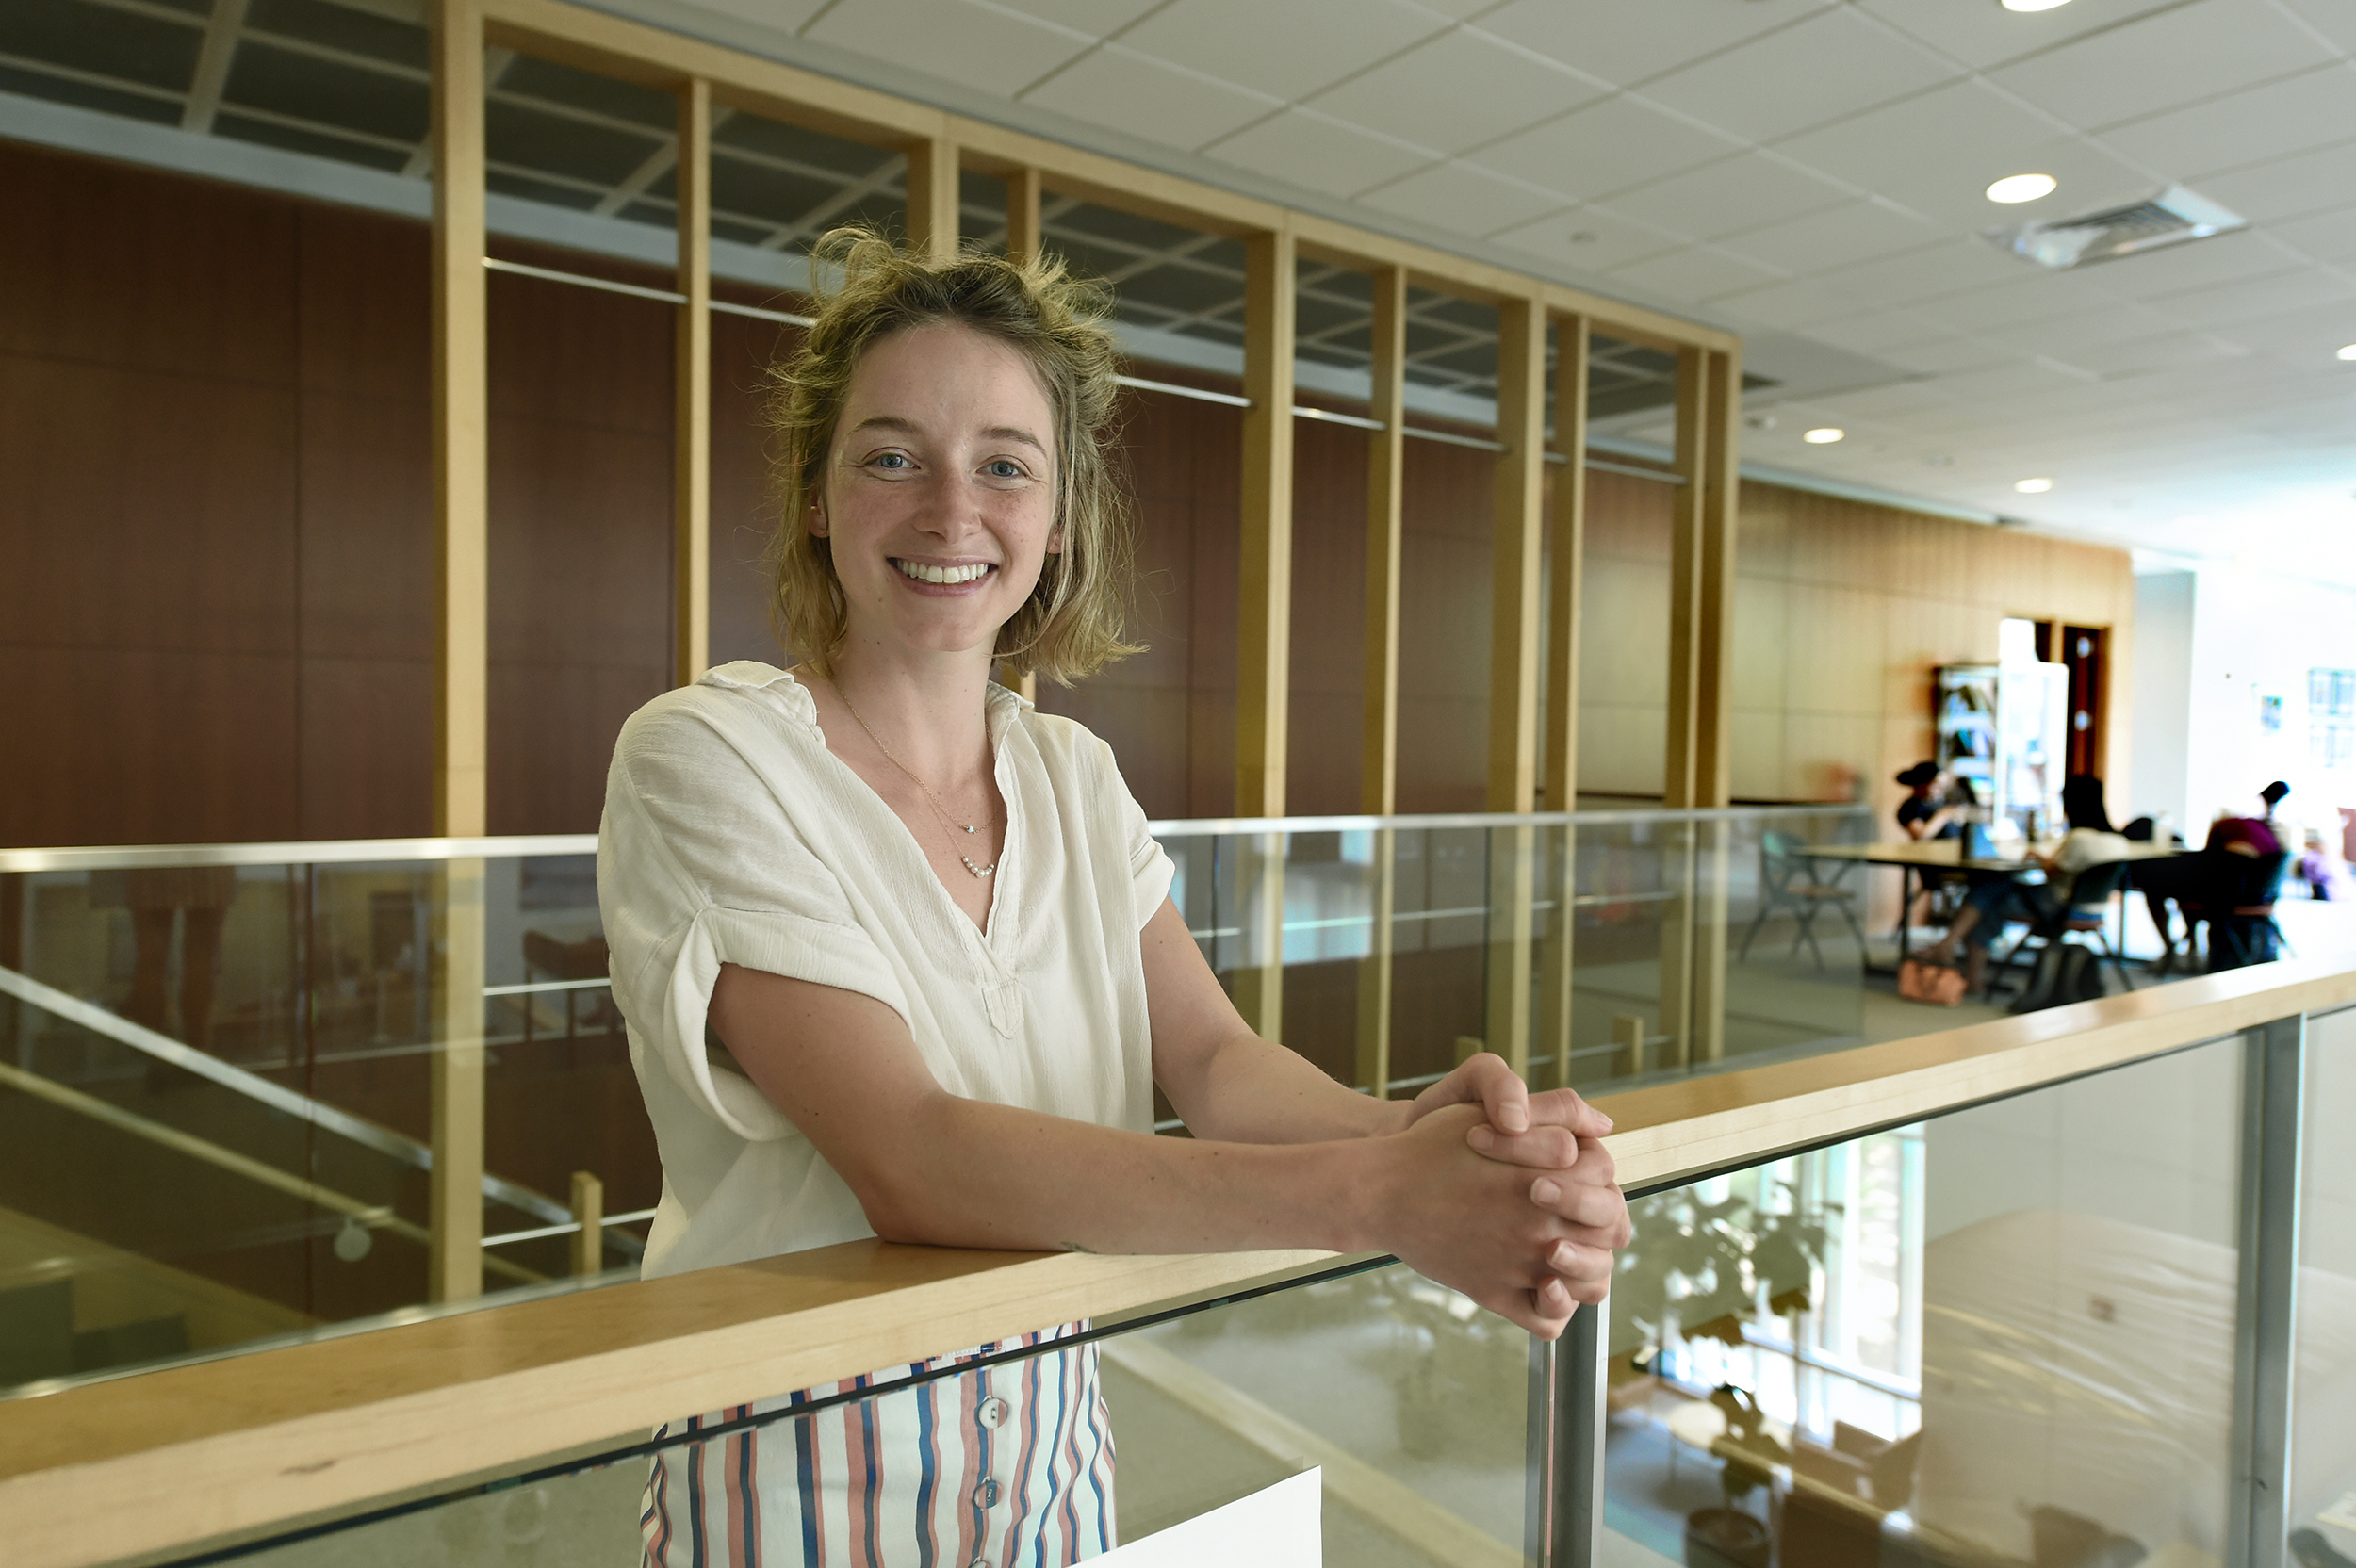 Catherine Haas stands near the railing on the second floor of the FedEx Global Education Center.